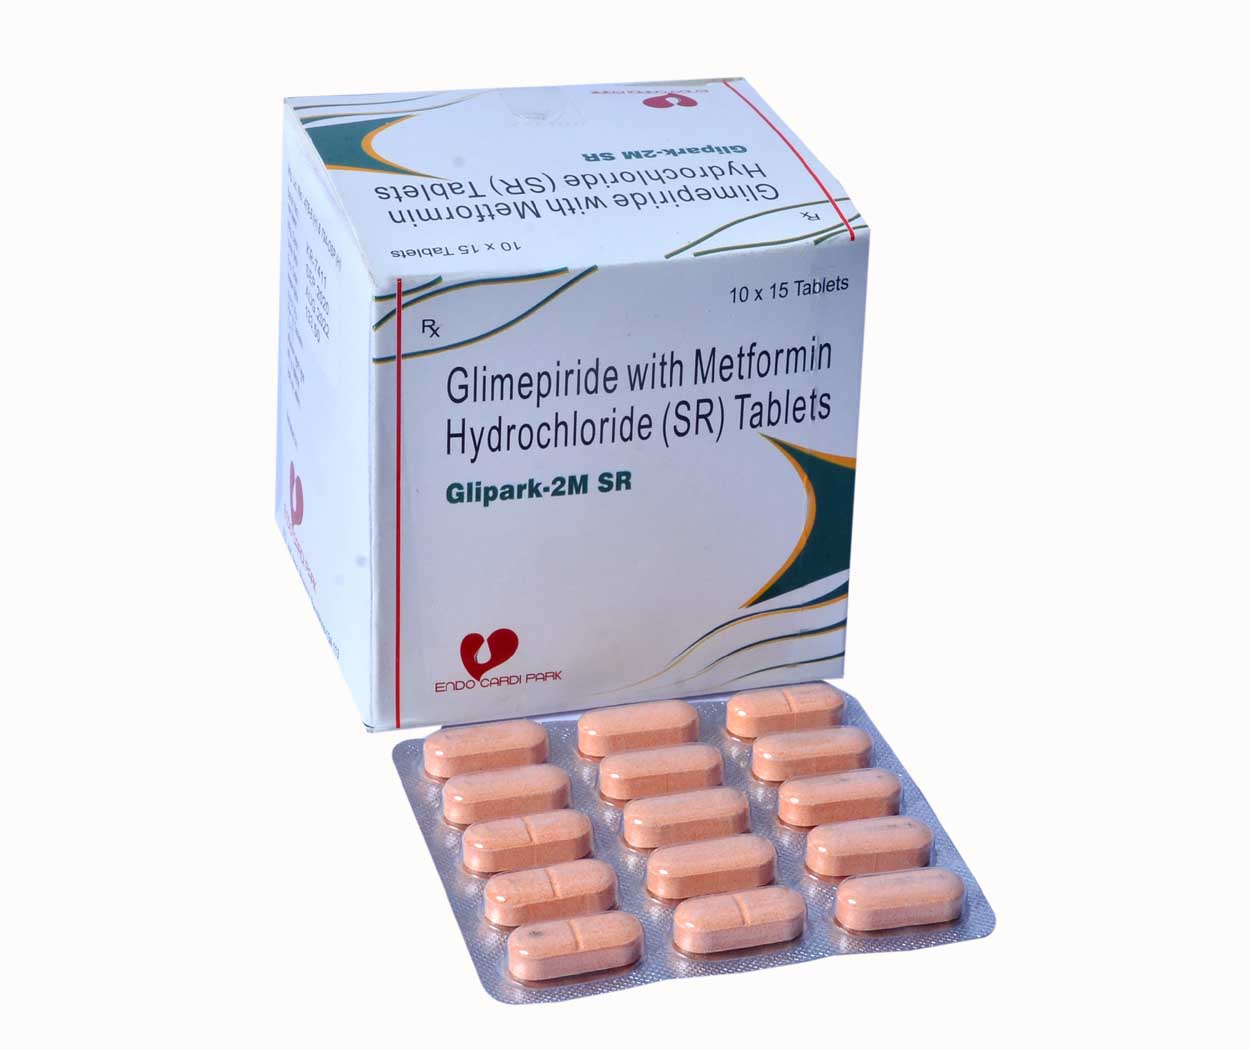 Product Name: Glipark 2M SR, Compositions of Glipark 2M SR are Glimepiride with Metformin Hydrochloride (SR) Tablets  - Park Pharmaceuticals